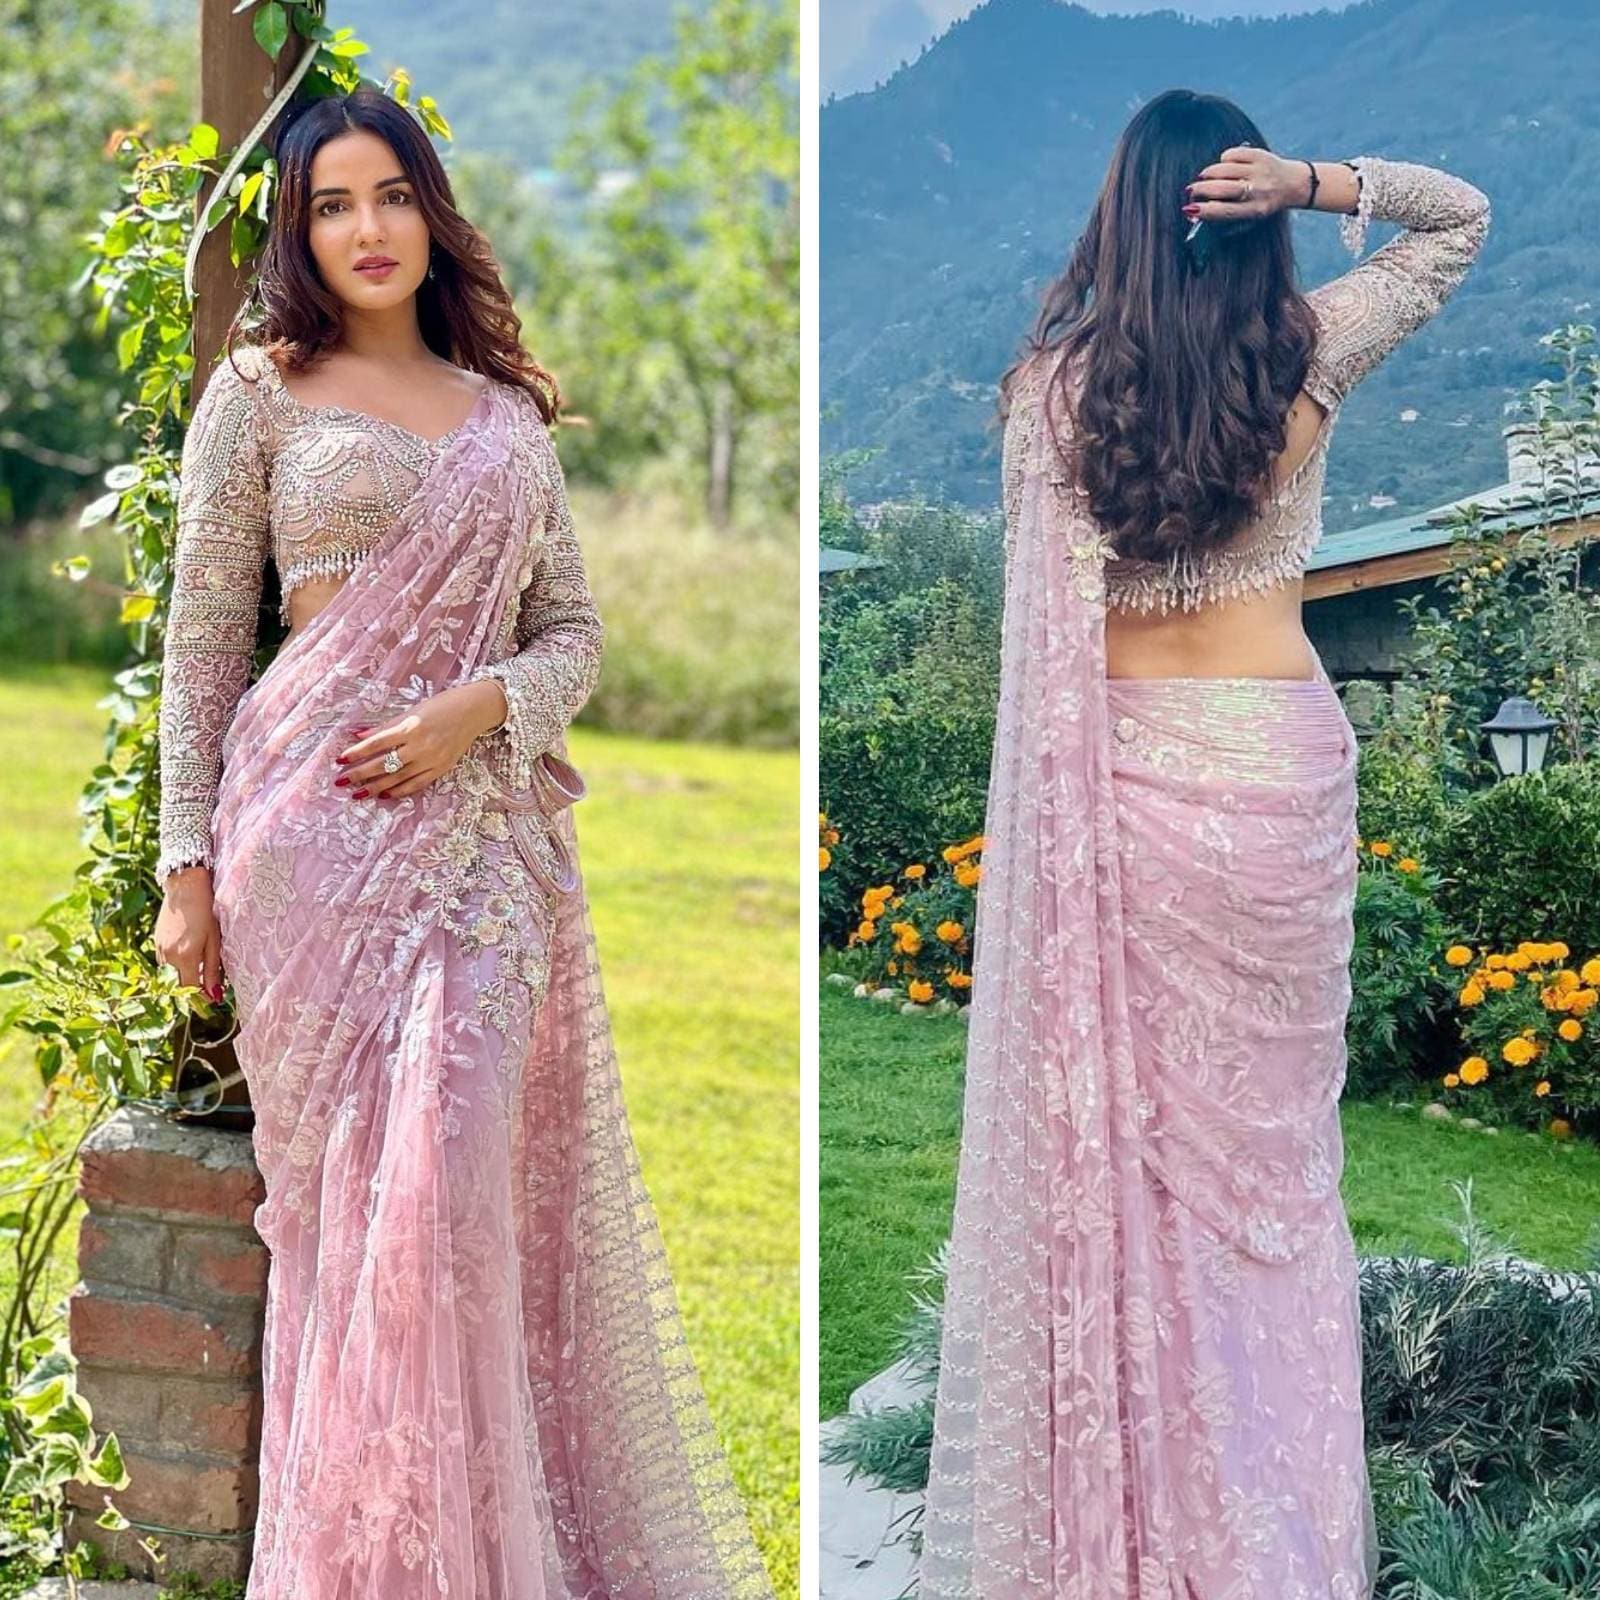 Jasmin Bhasin Is A Vision To Behold In Transparent Lavender Saree, Check  Out The TV Diva's Most Gorgeous Saree Moments